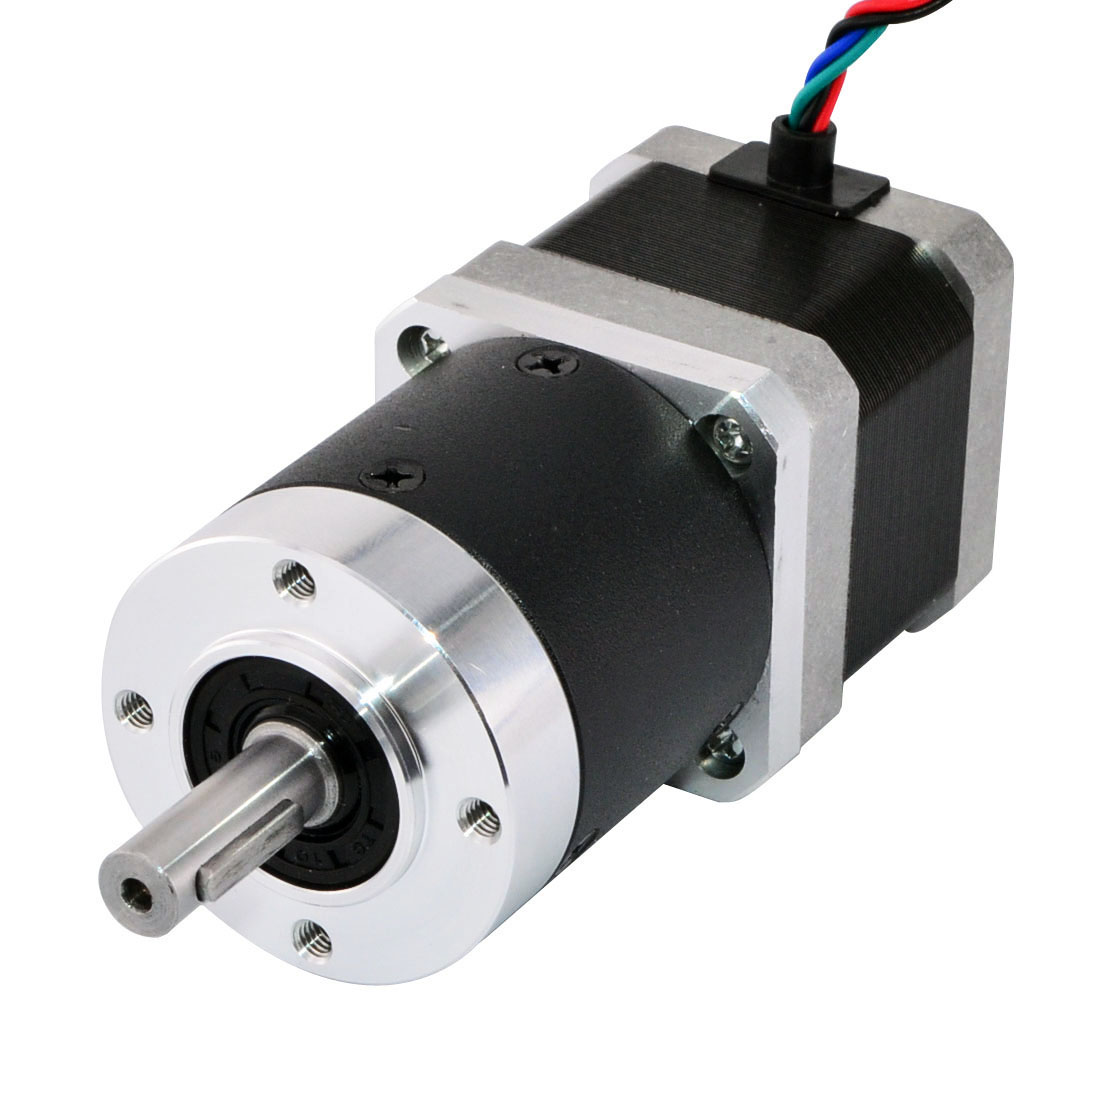 Planetary Gearbox 3.6:1 Ratio fitted Stepper Motor 